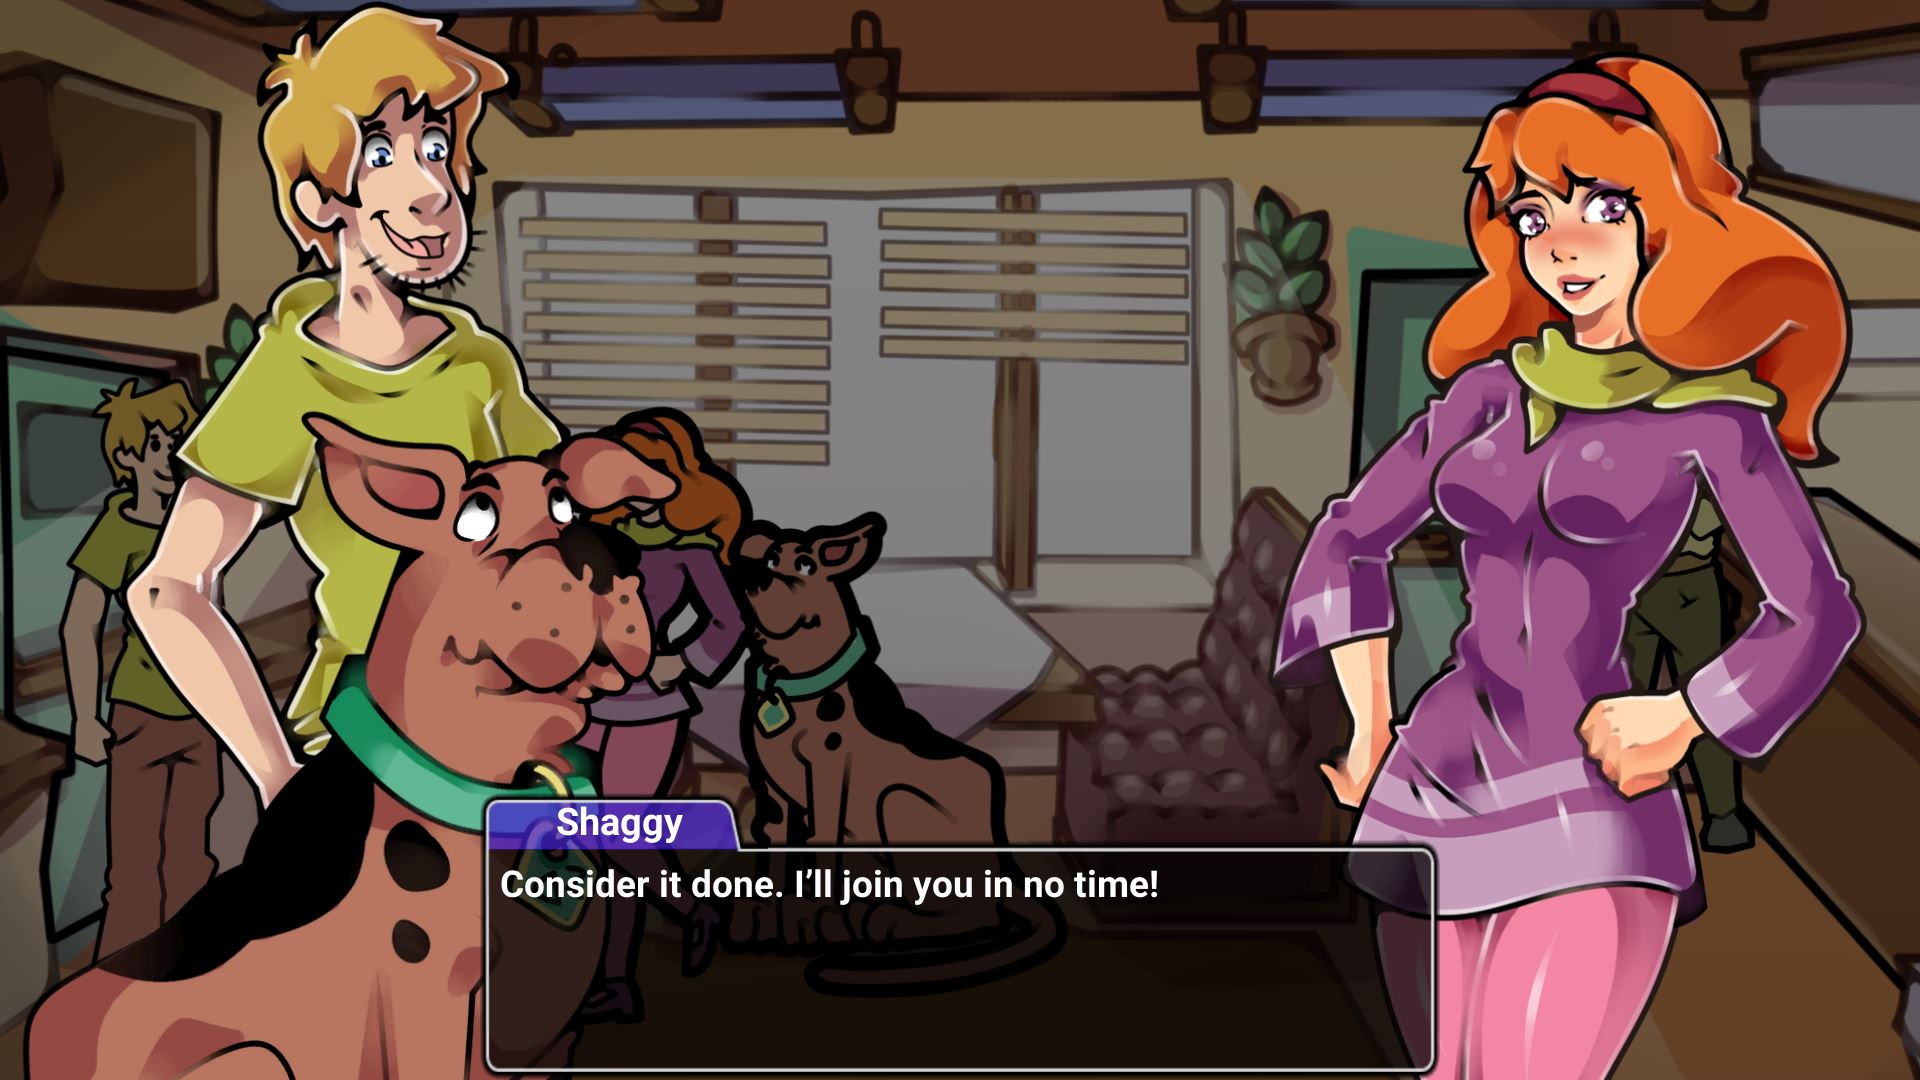 Animation Porn Scooby Doo - Scooby-Doo! A Depraved Investigation Unity Porn Sex Game v.2 Download for  Windows, Linux, Android